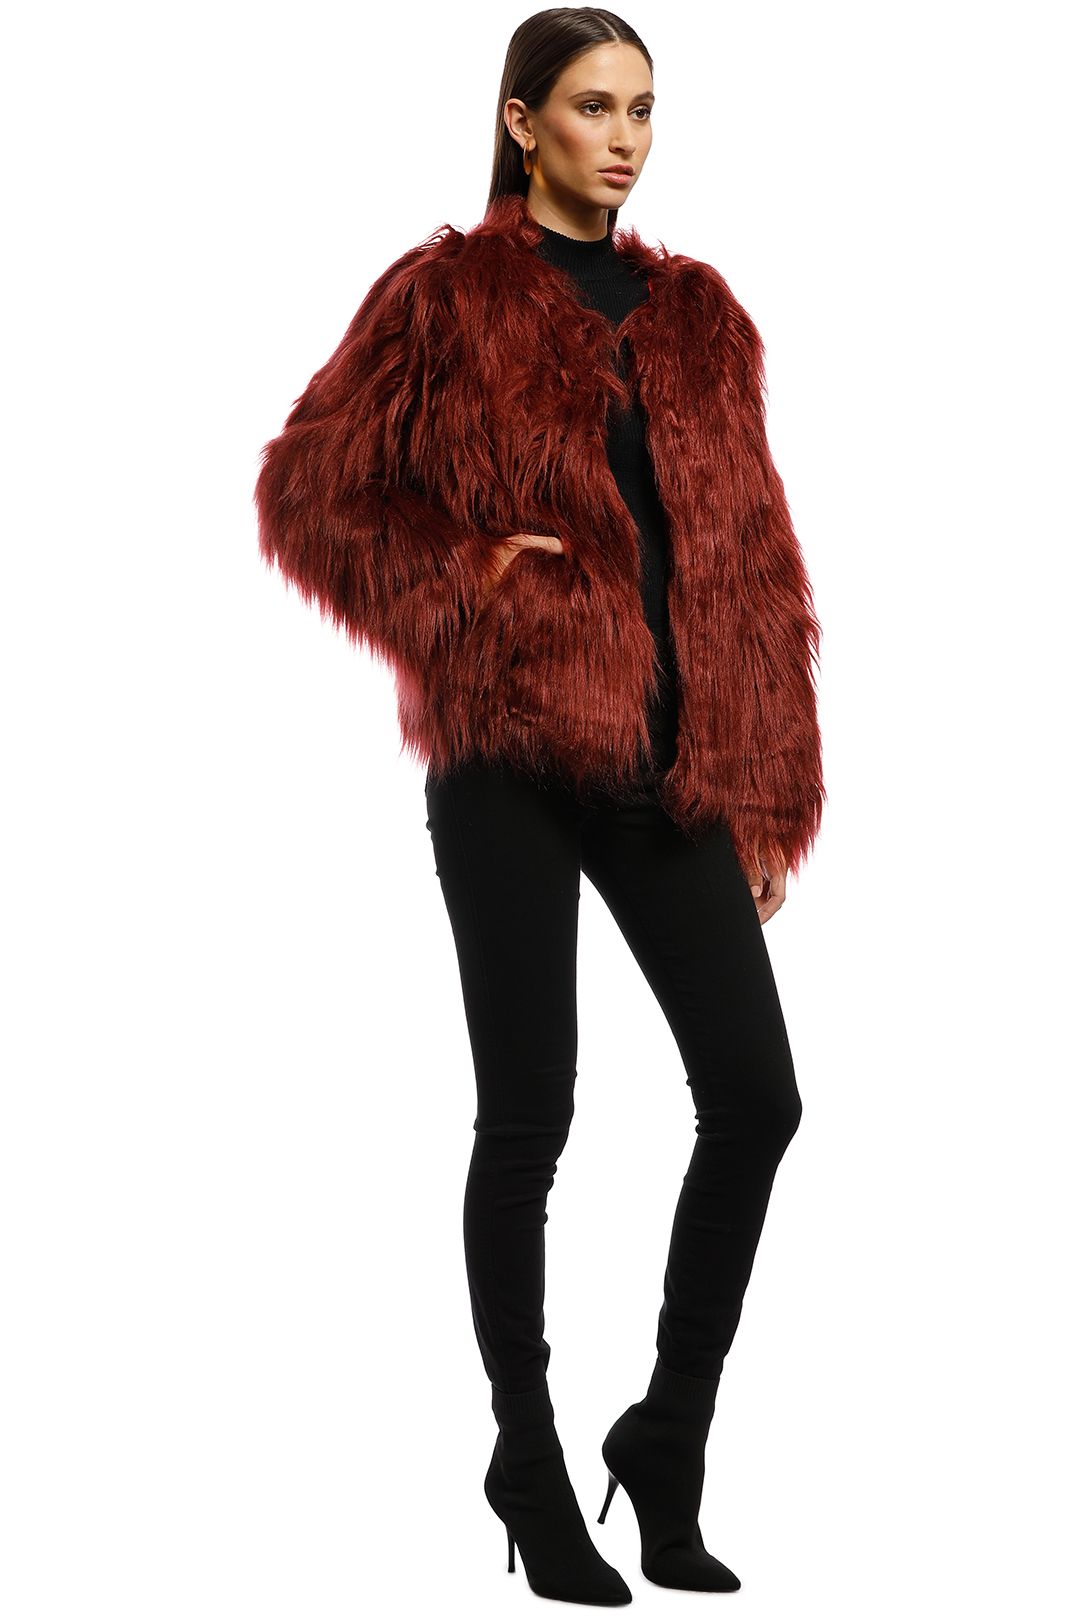 Everly - Marmont Faux Fur Jacket - Wine - Side